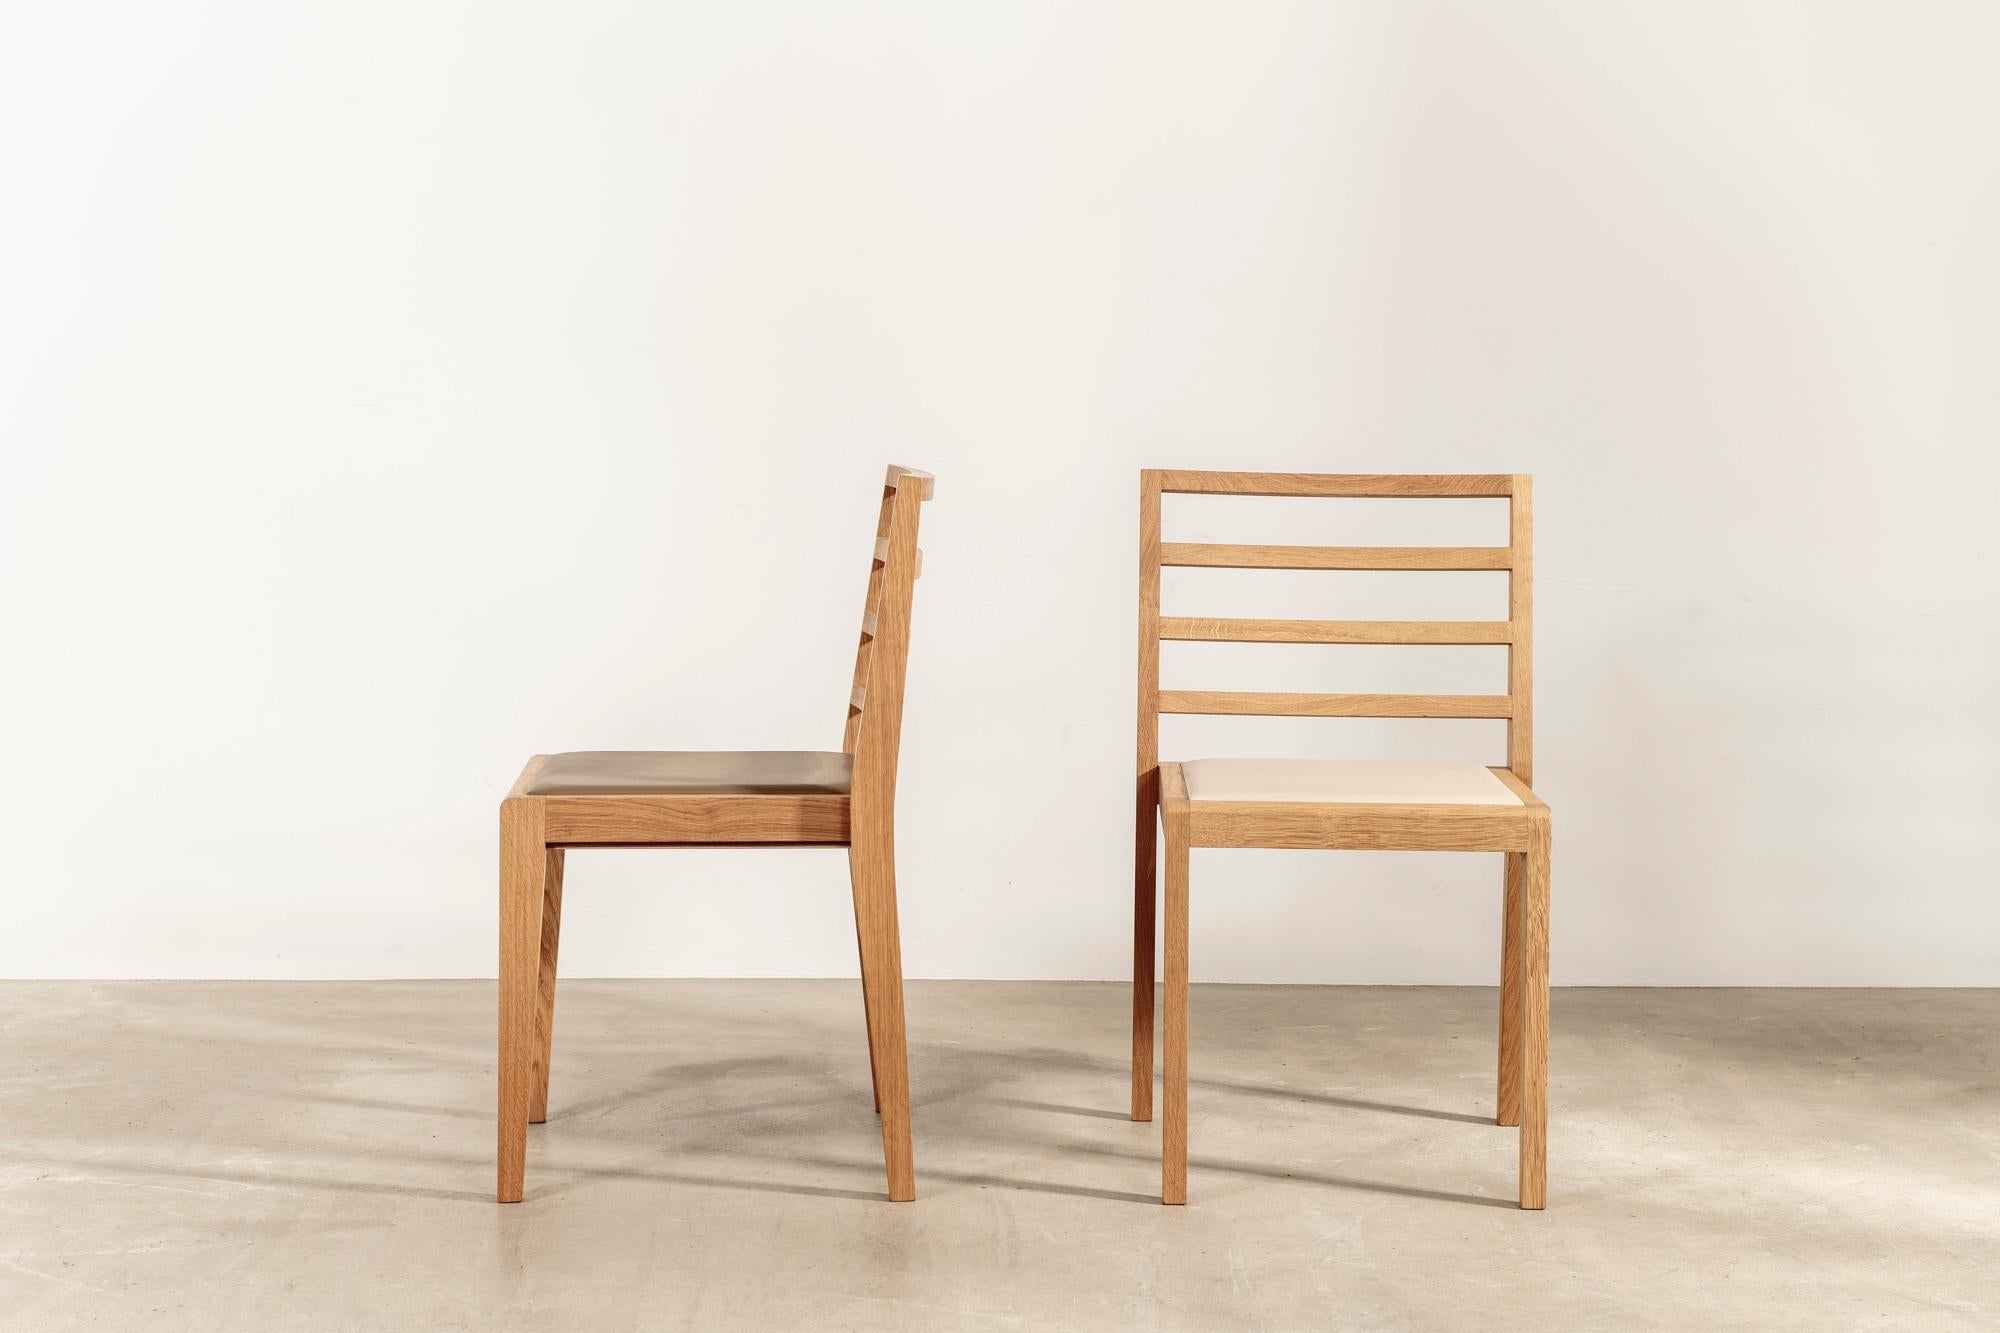 La discrète is a cabinetmakers chair; understated at first glance, but revealing a sophisticated craftsmanship upon closer inspection.

Light and stackable, the chairs have been manufactured from European oak to traditional standards by English